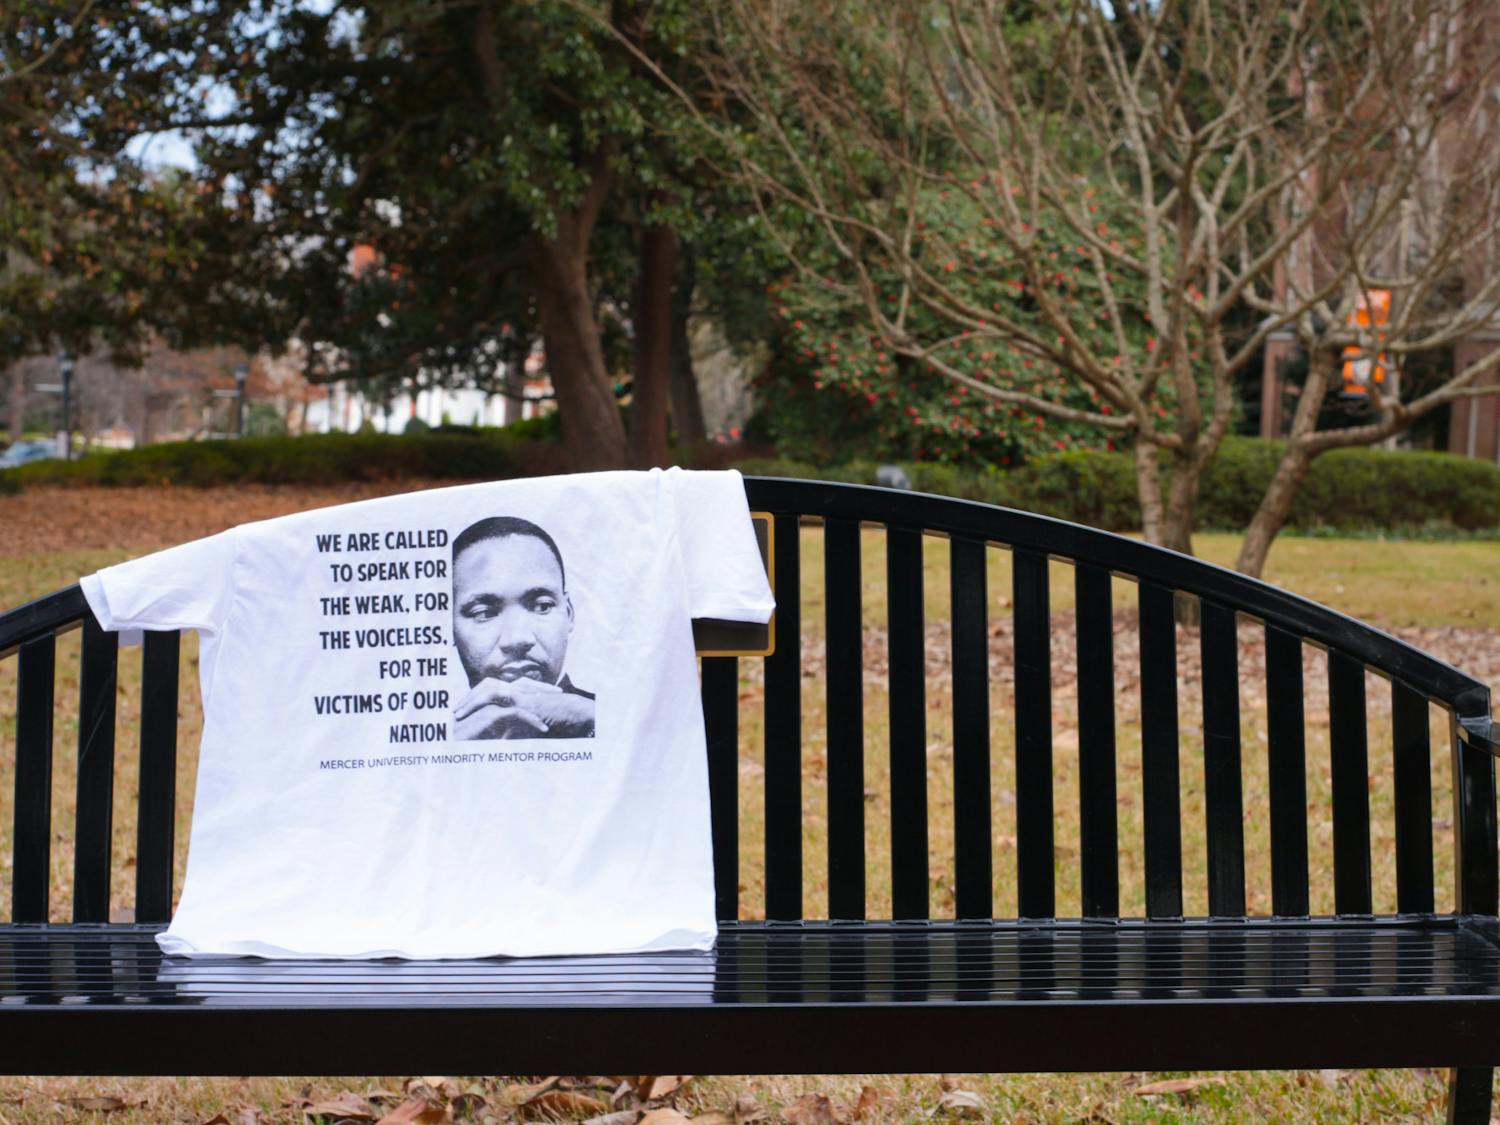 A photo of the event’s t-shirt, printed with a quote from Martin Luther King Jr.